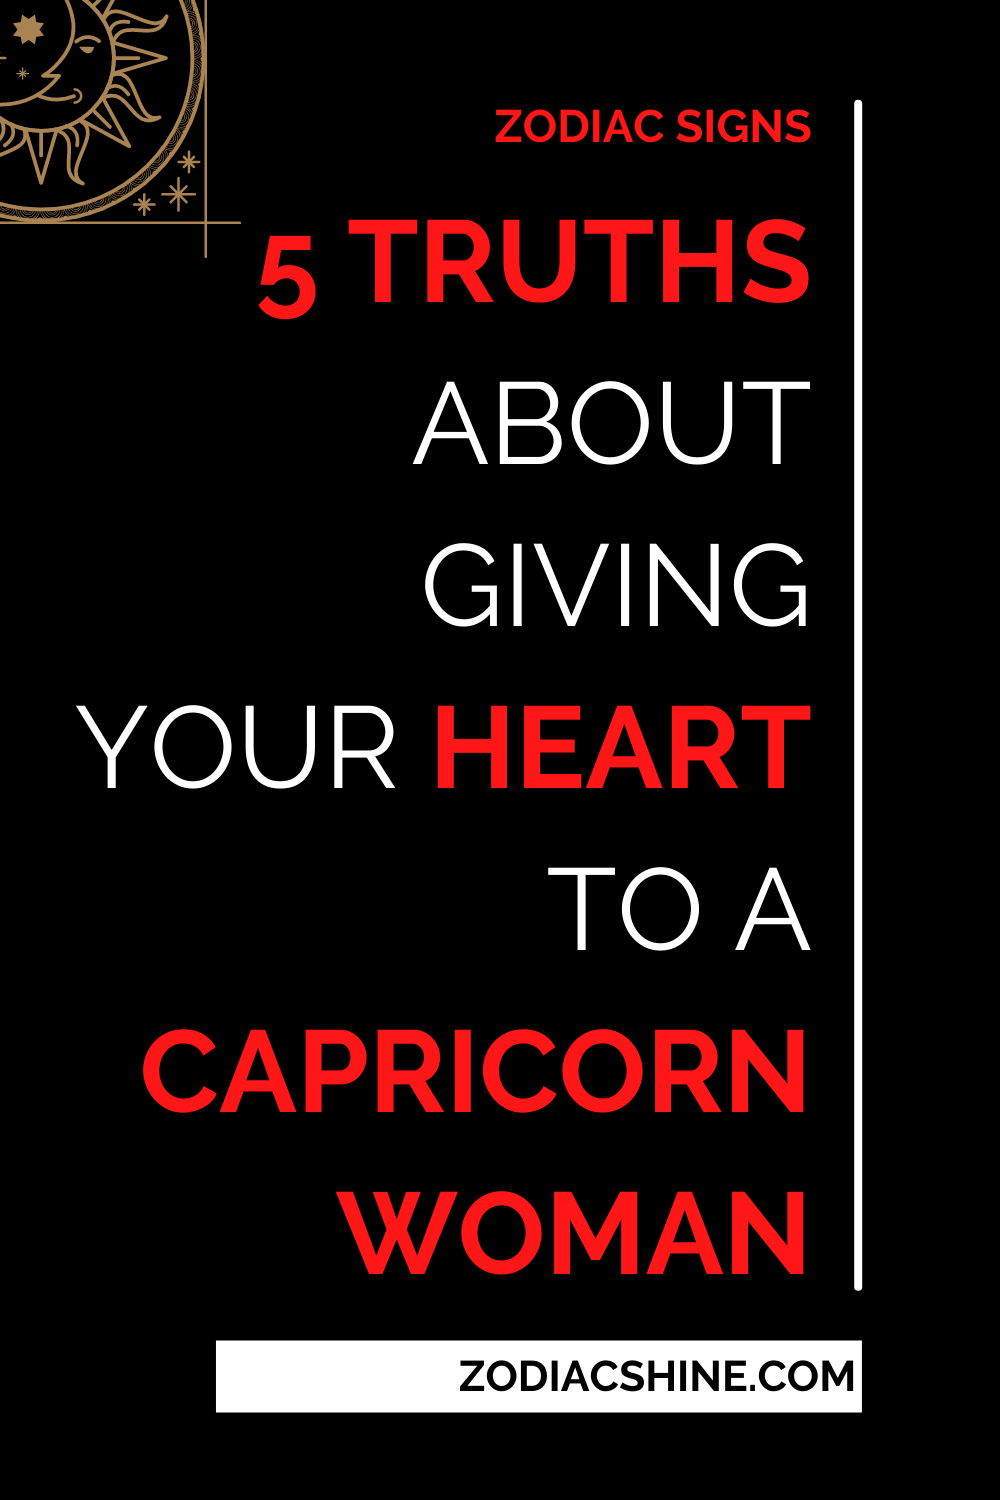 5 Truths About Giving Your Heart To A Capricorn Woman